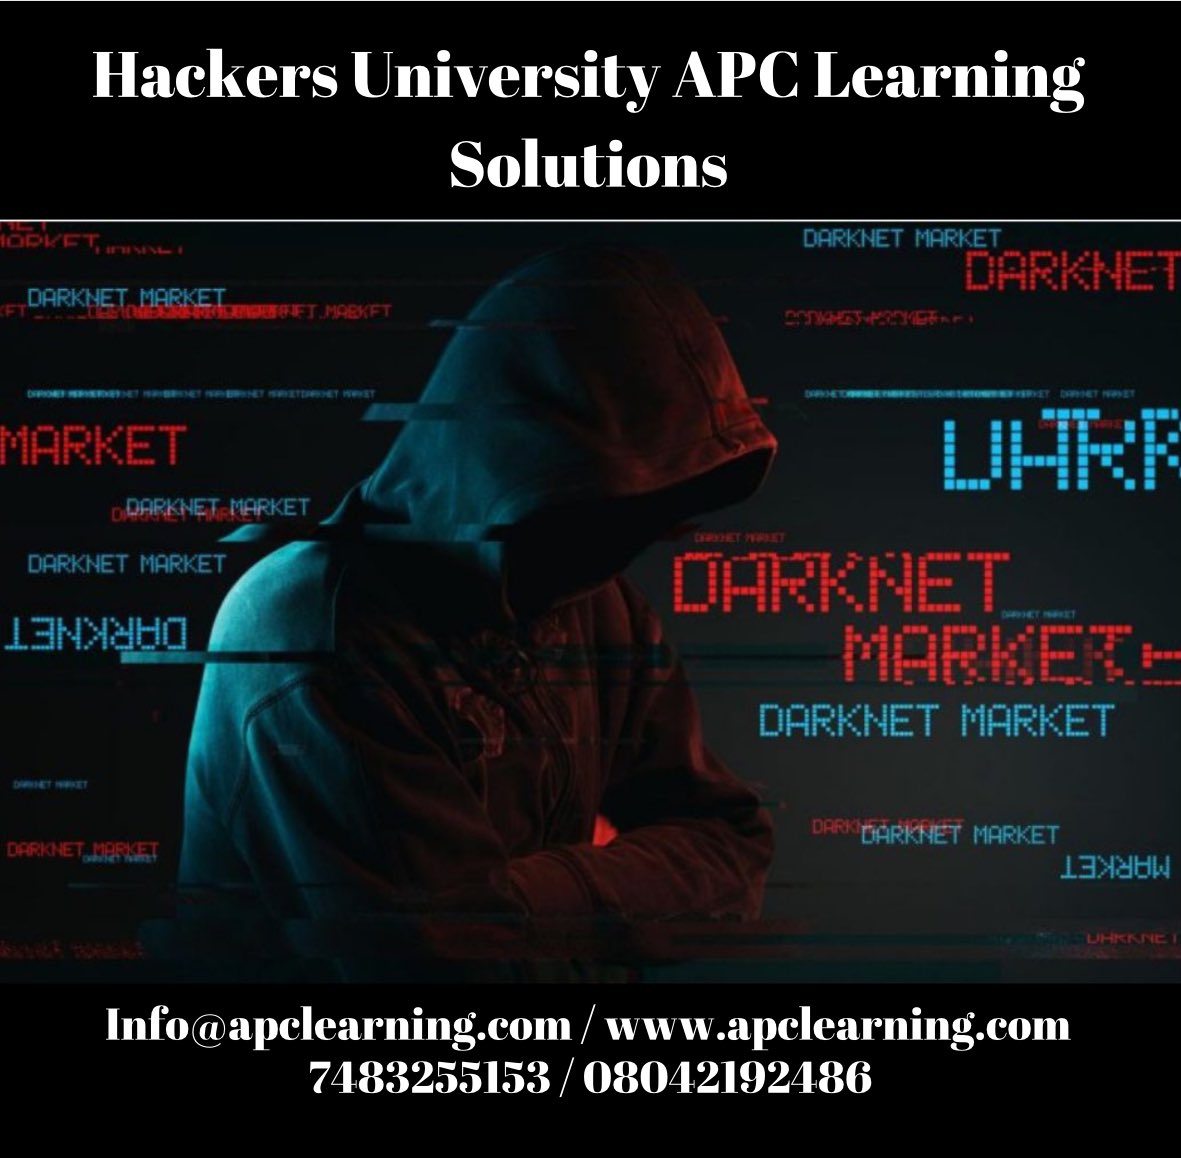 #cissp #cybersecurity #ceh #informationsecurity #infosec #comptia #ethicalhacking #isaca #oscp #security #cyber #cism #cybersecuritytraining #datasecurity #gdpr #hacking #ccna #securityplus #isc #cybersecurityengineer #womenintech #cisco #dataprivacy #malware #ccpa #itsecurity